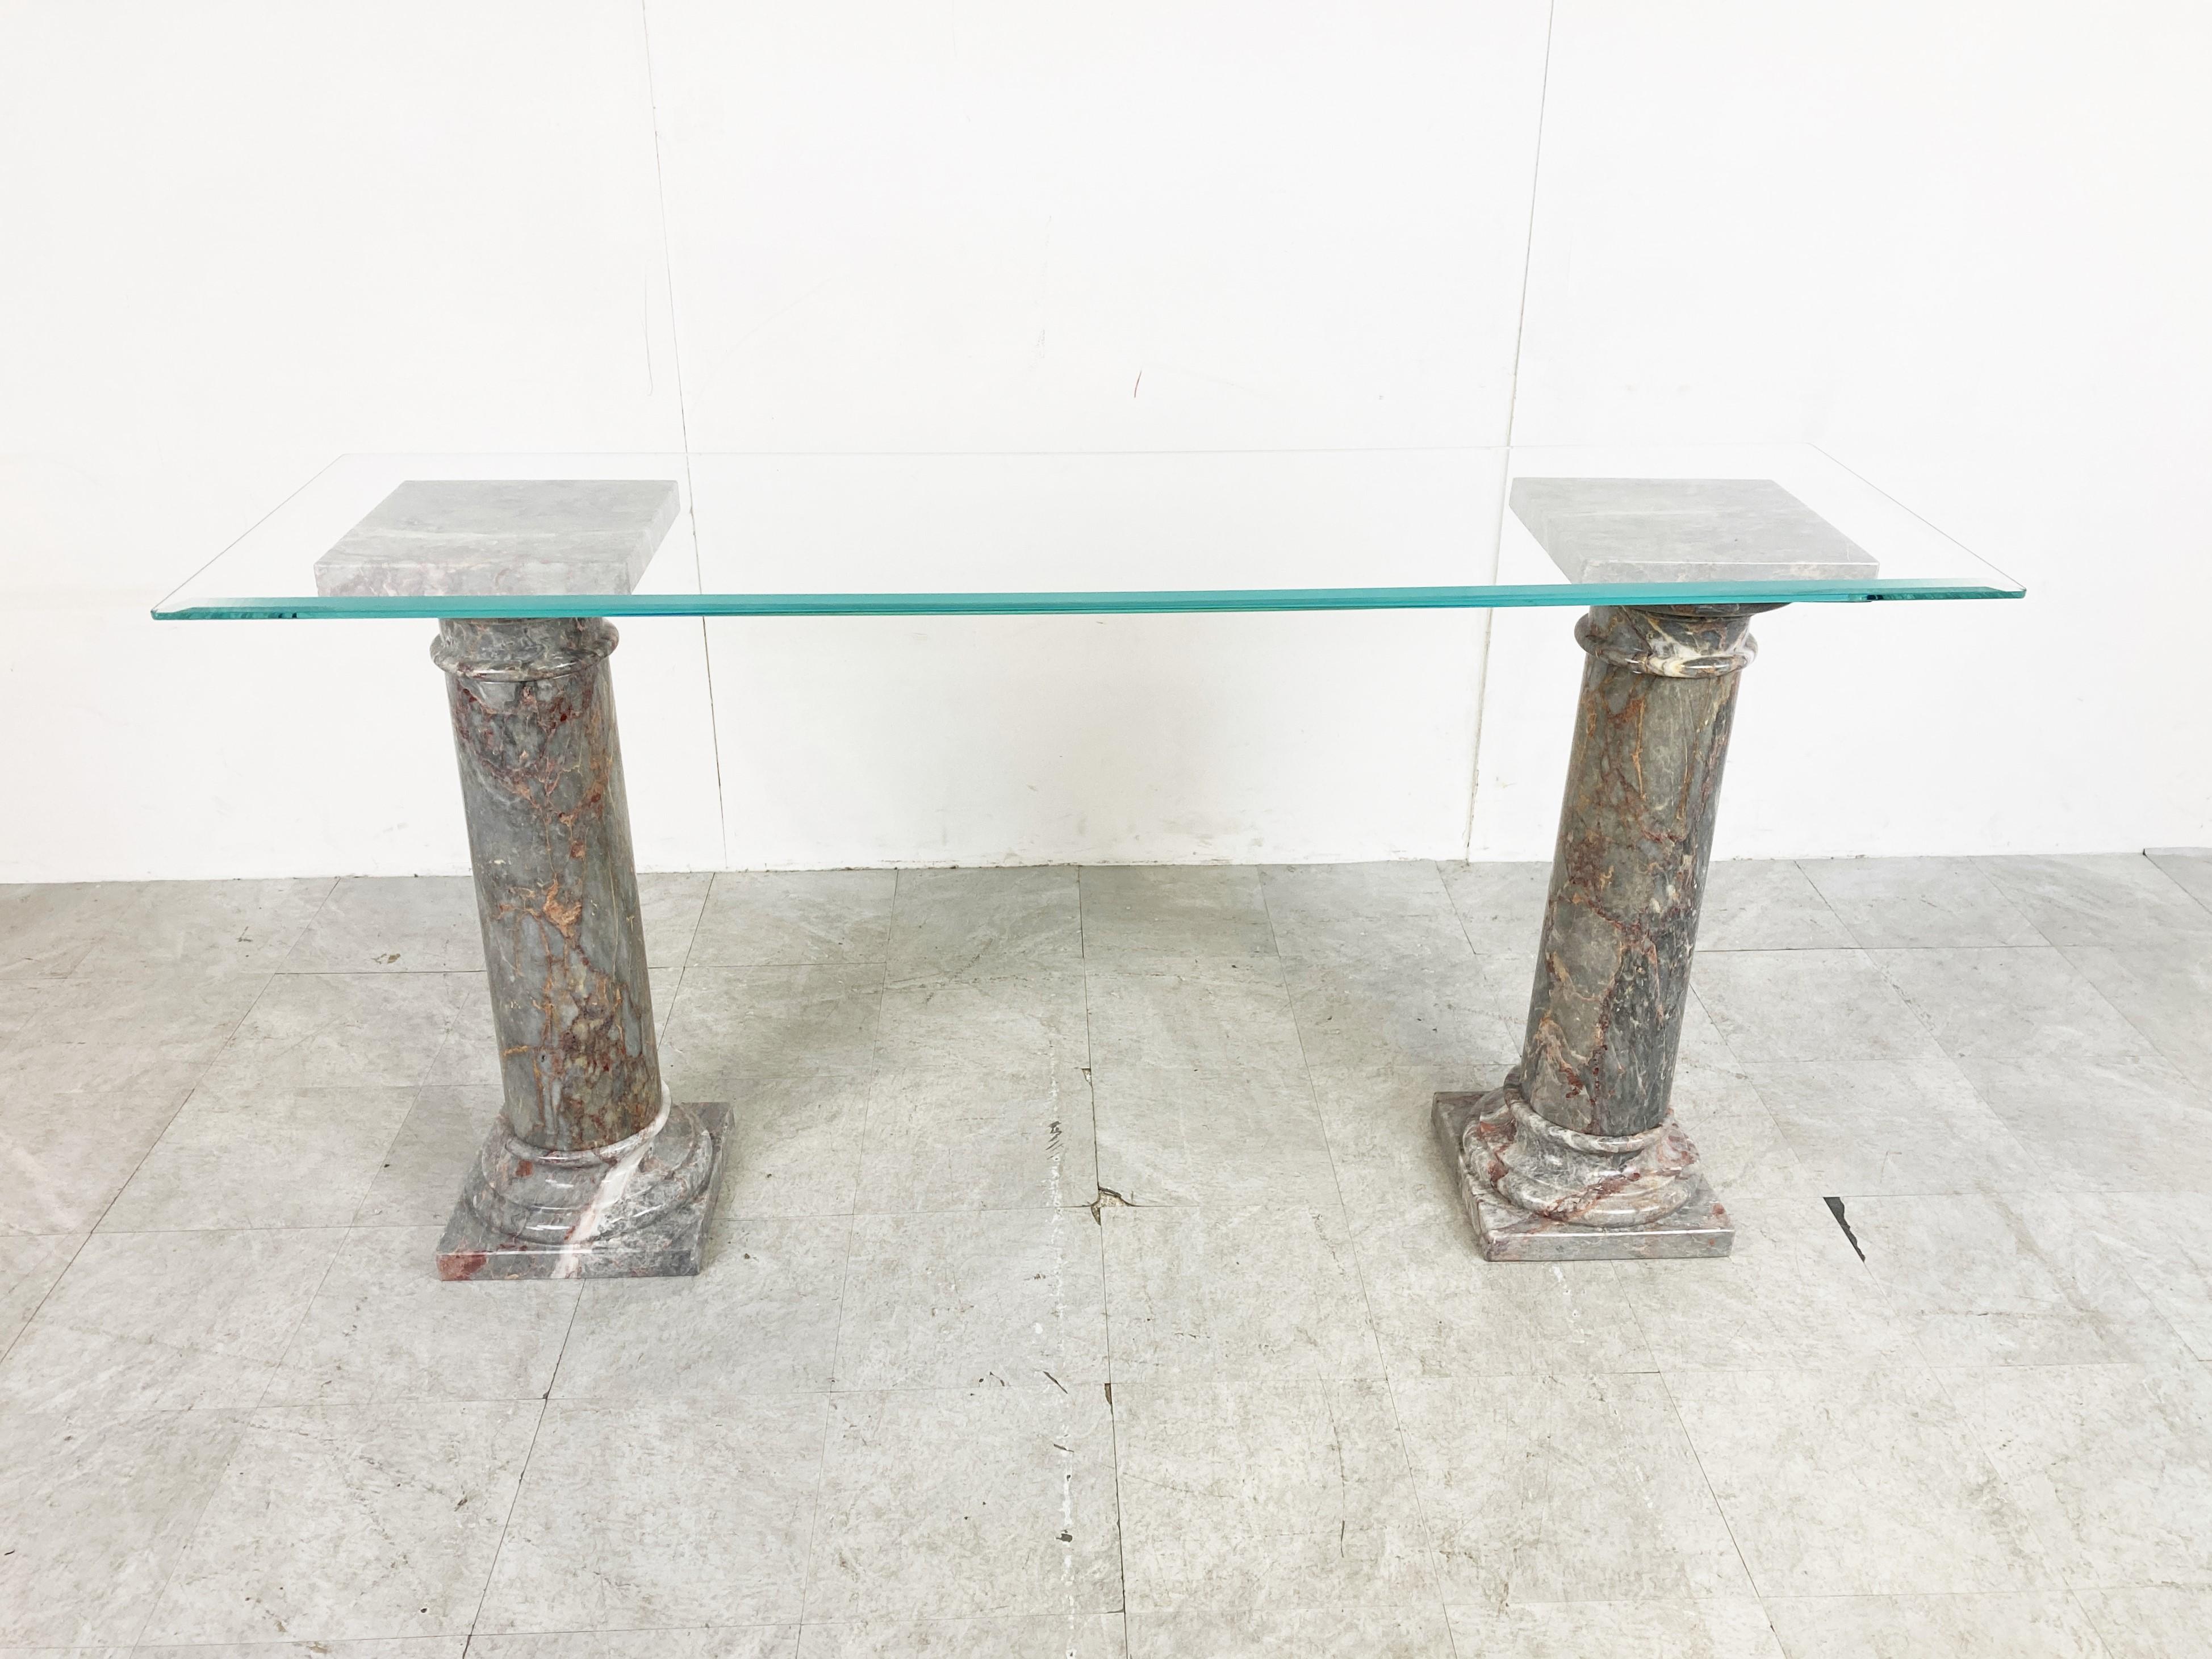 Beautiful console table consisting of two grey marble columns and a clear glass top.

The marble columns come in three pieces for easier transport.

The glass can be customized uppon request.

Beautiful natural veining in the marble.

very